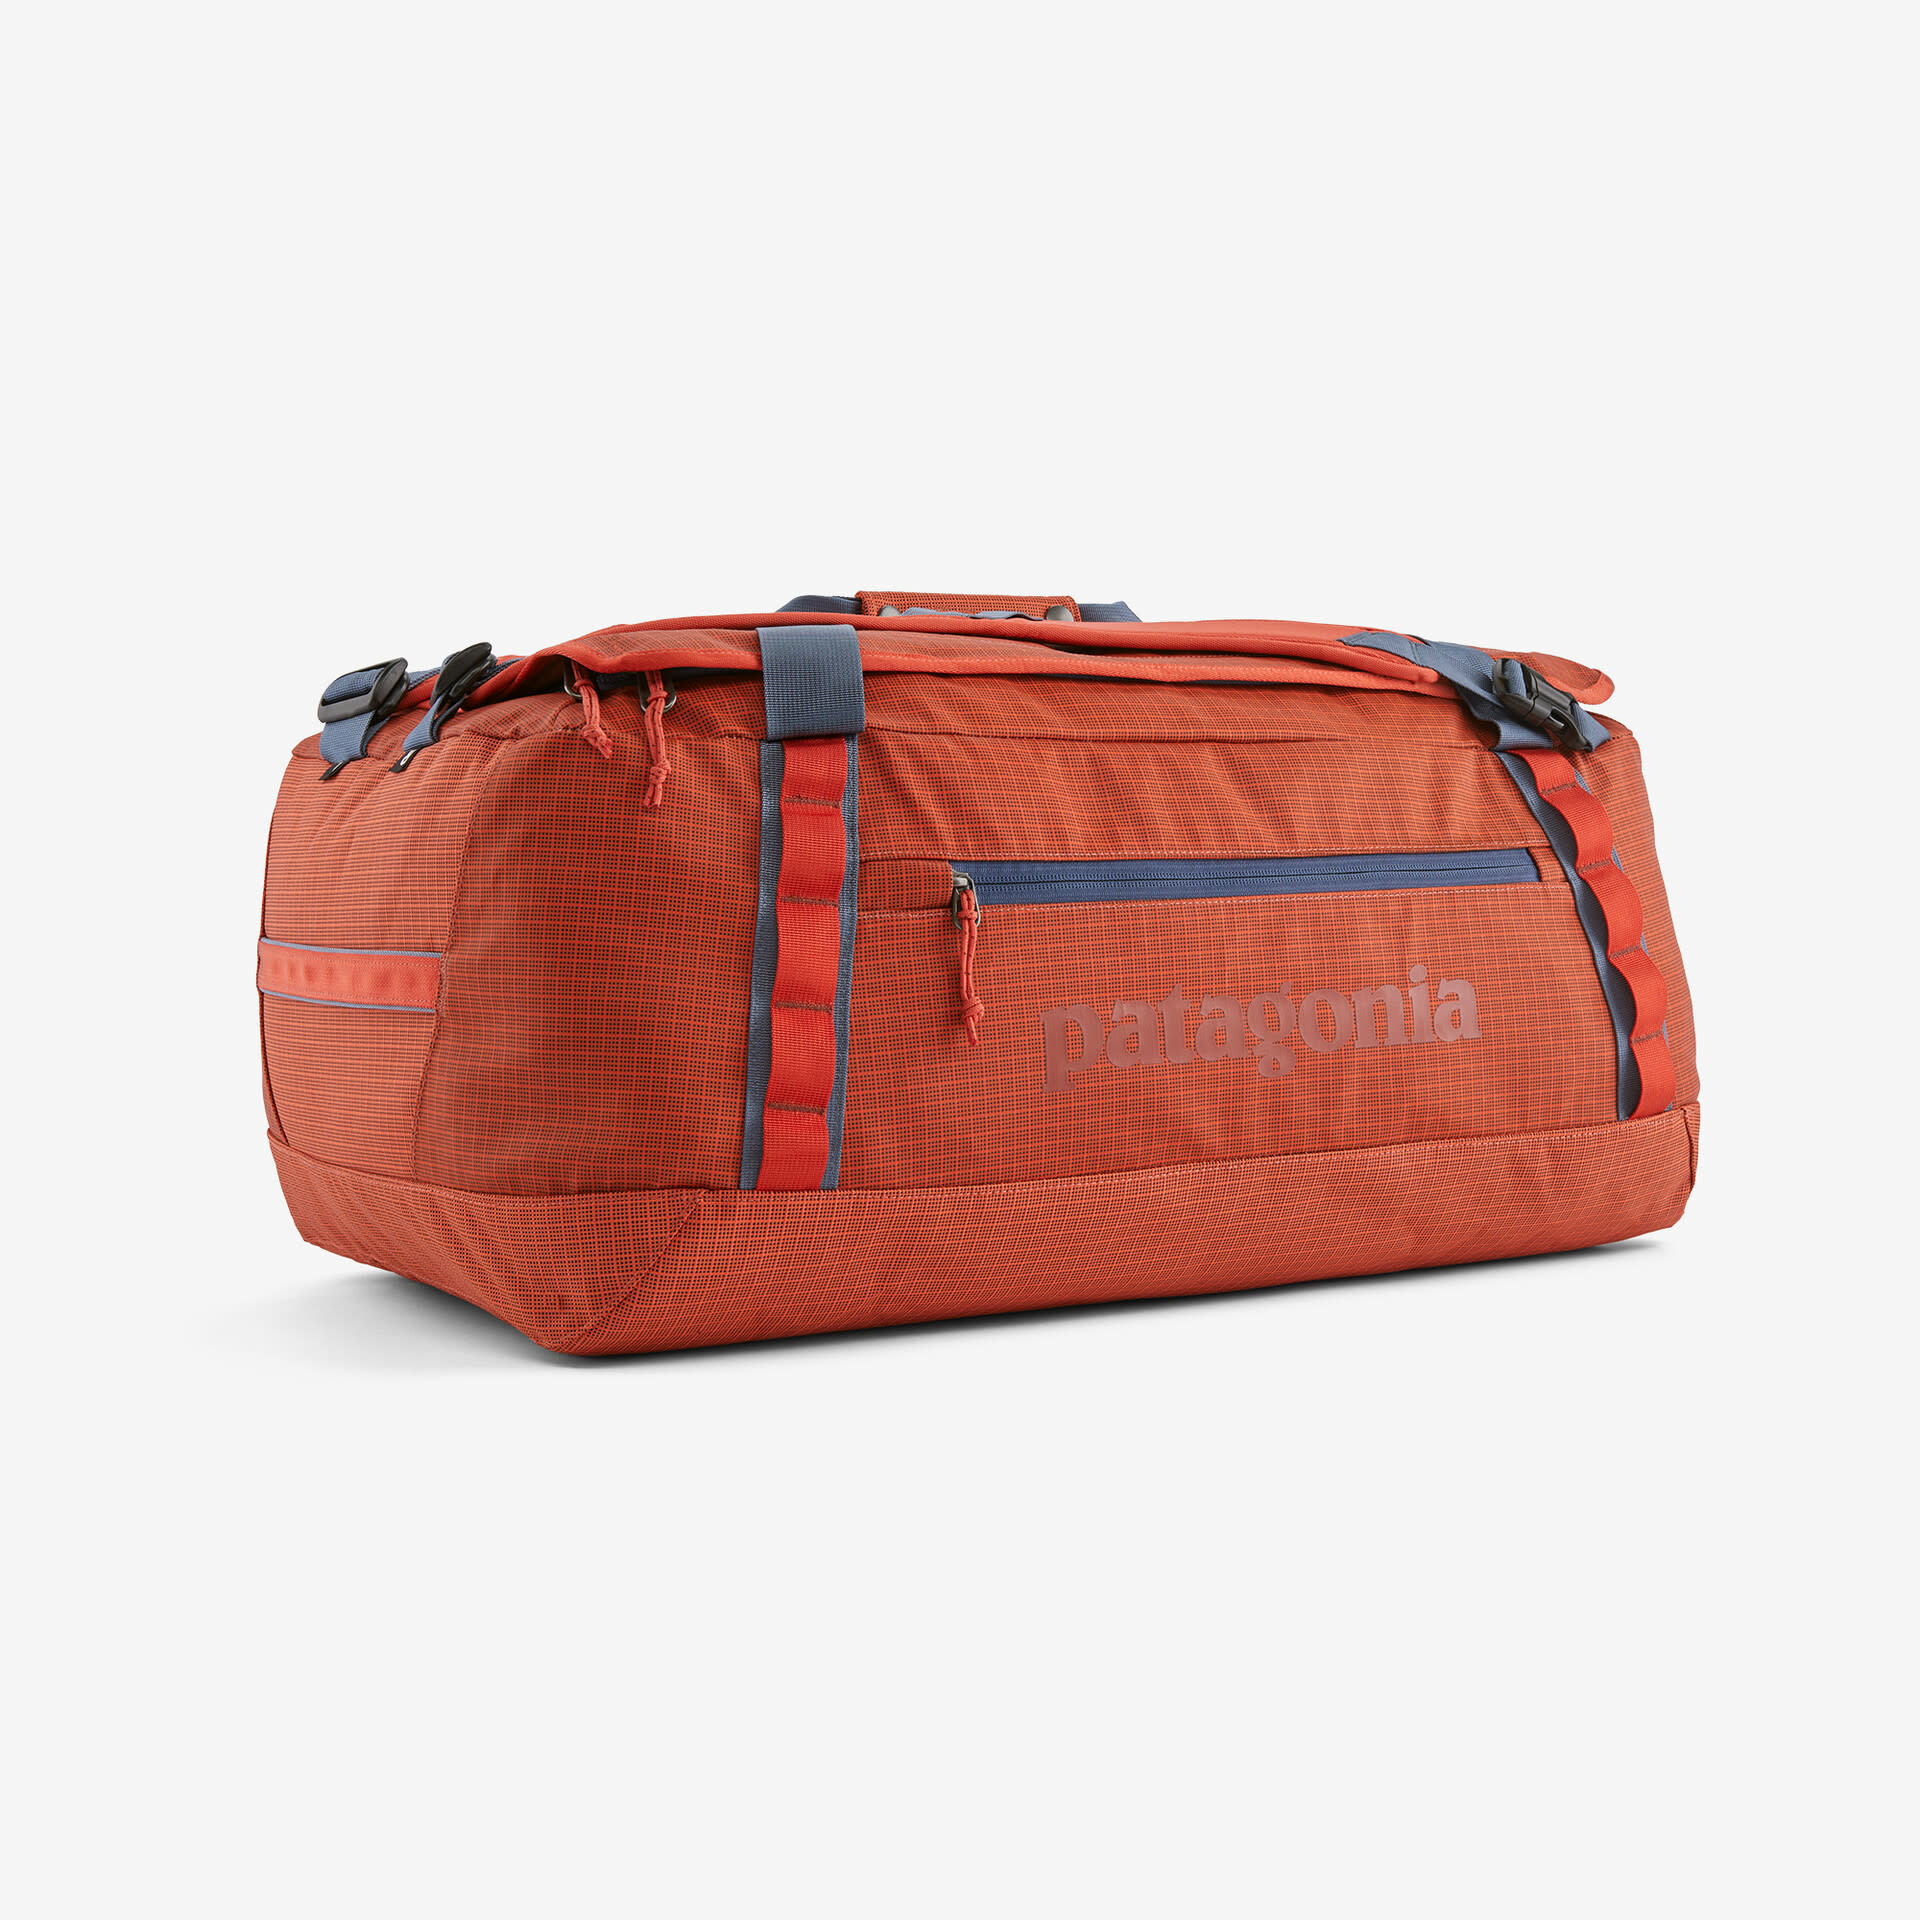 Patagonia Black Hole Duffel 55L (Pimento Red) - Royal Gorge Anglers